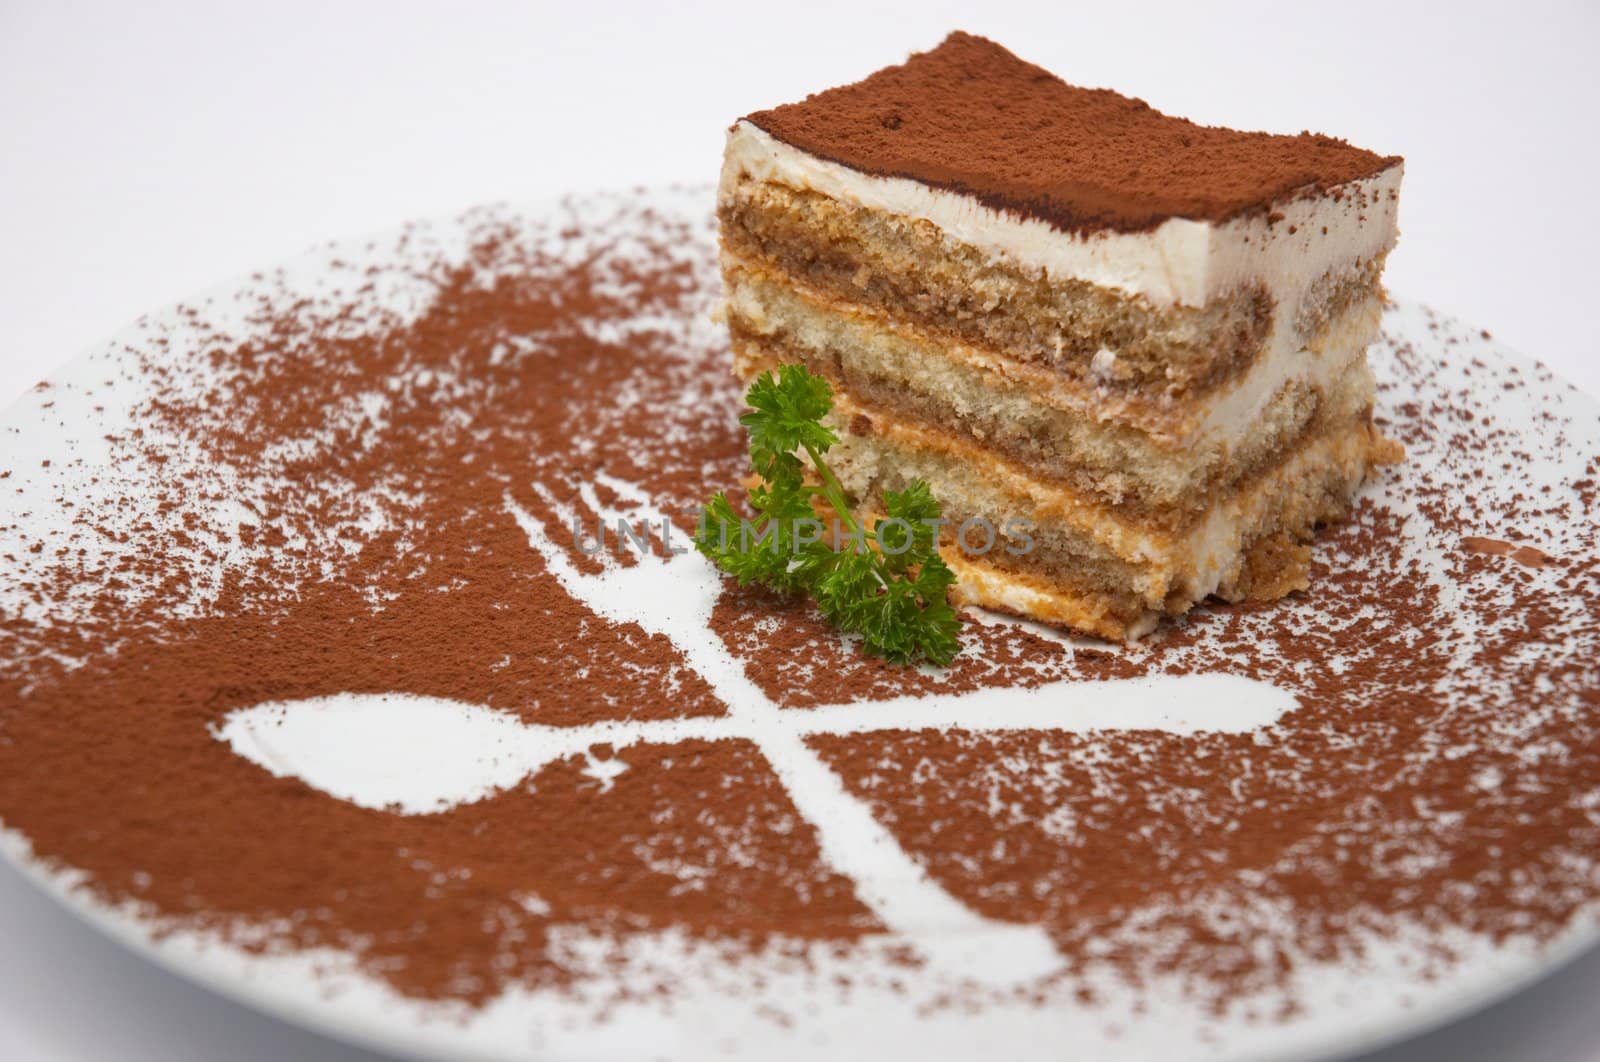 tiramisu dessert served on plate with cpecial decoration. isolated. shallow dof.